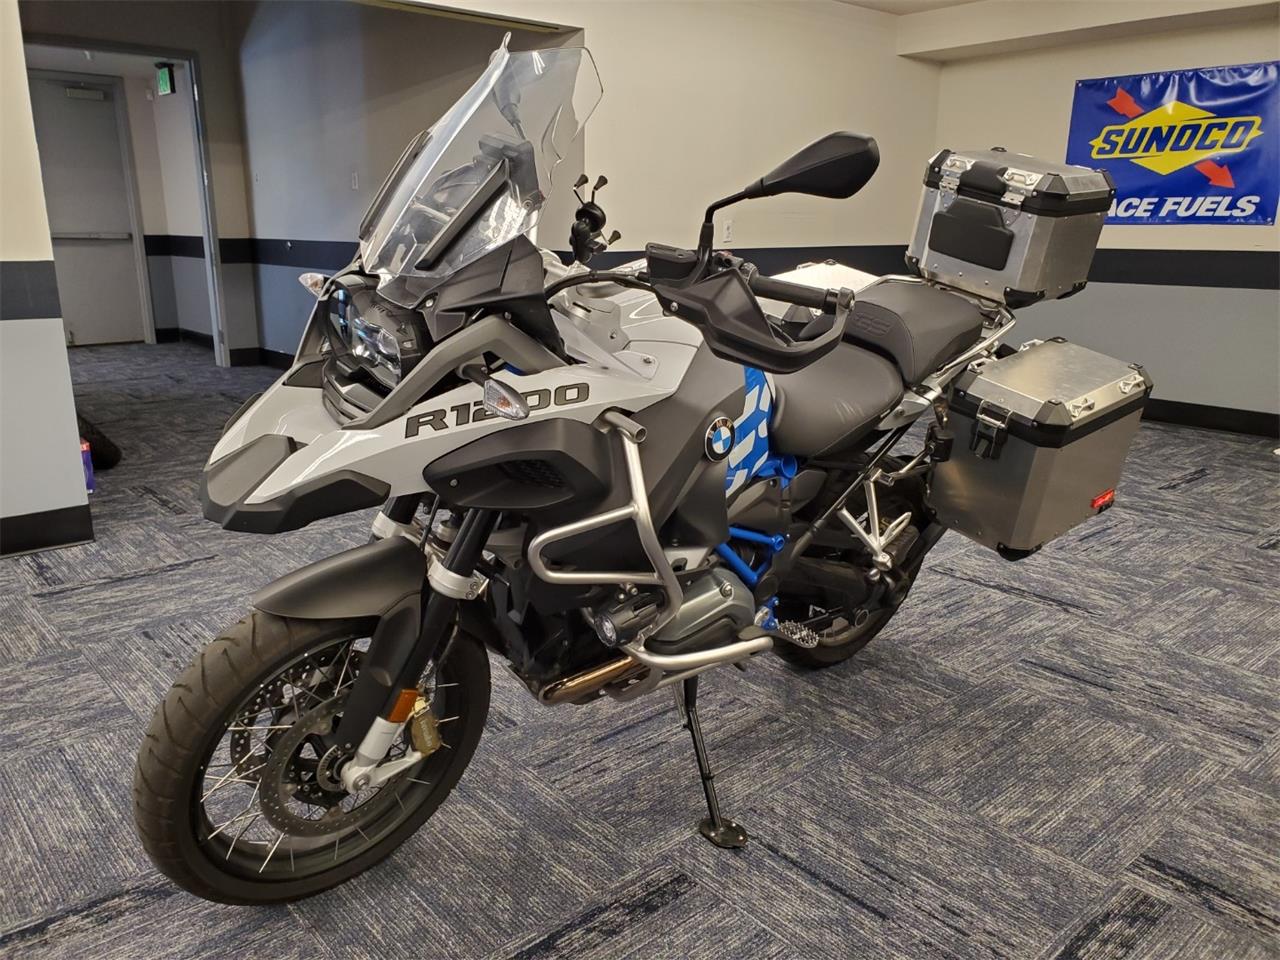 2018 BMW Motorcycle for Sale | ClassicCars.com | CC-1736852